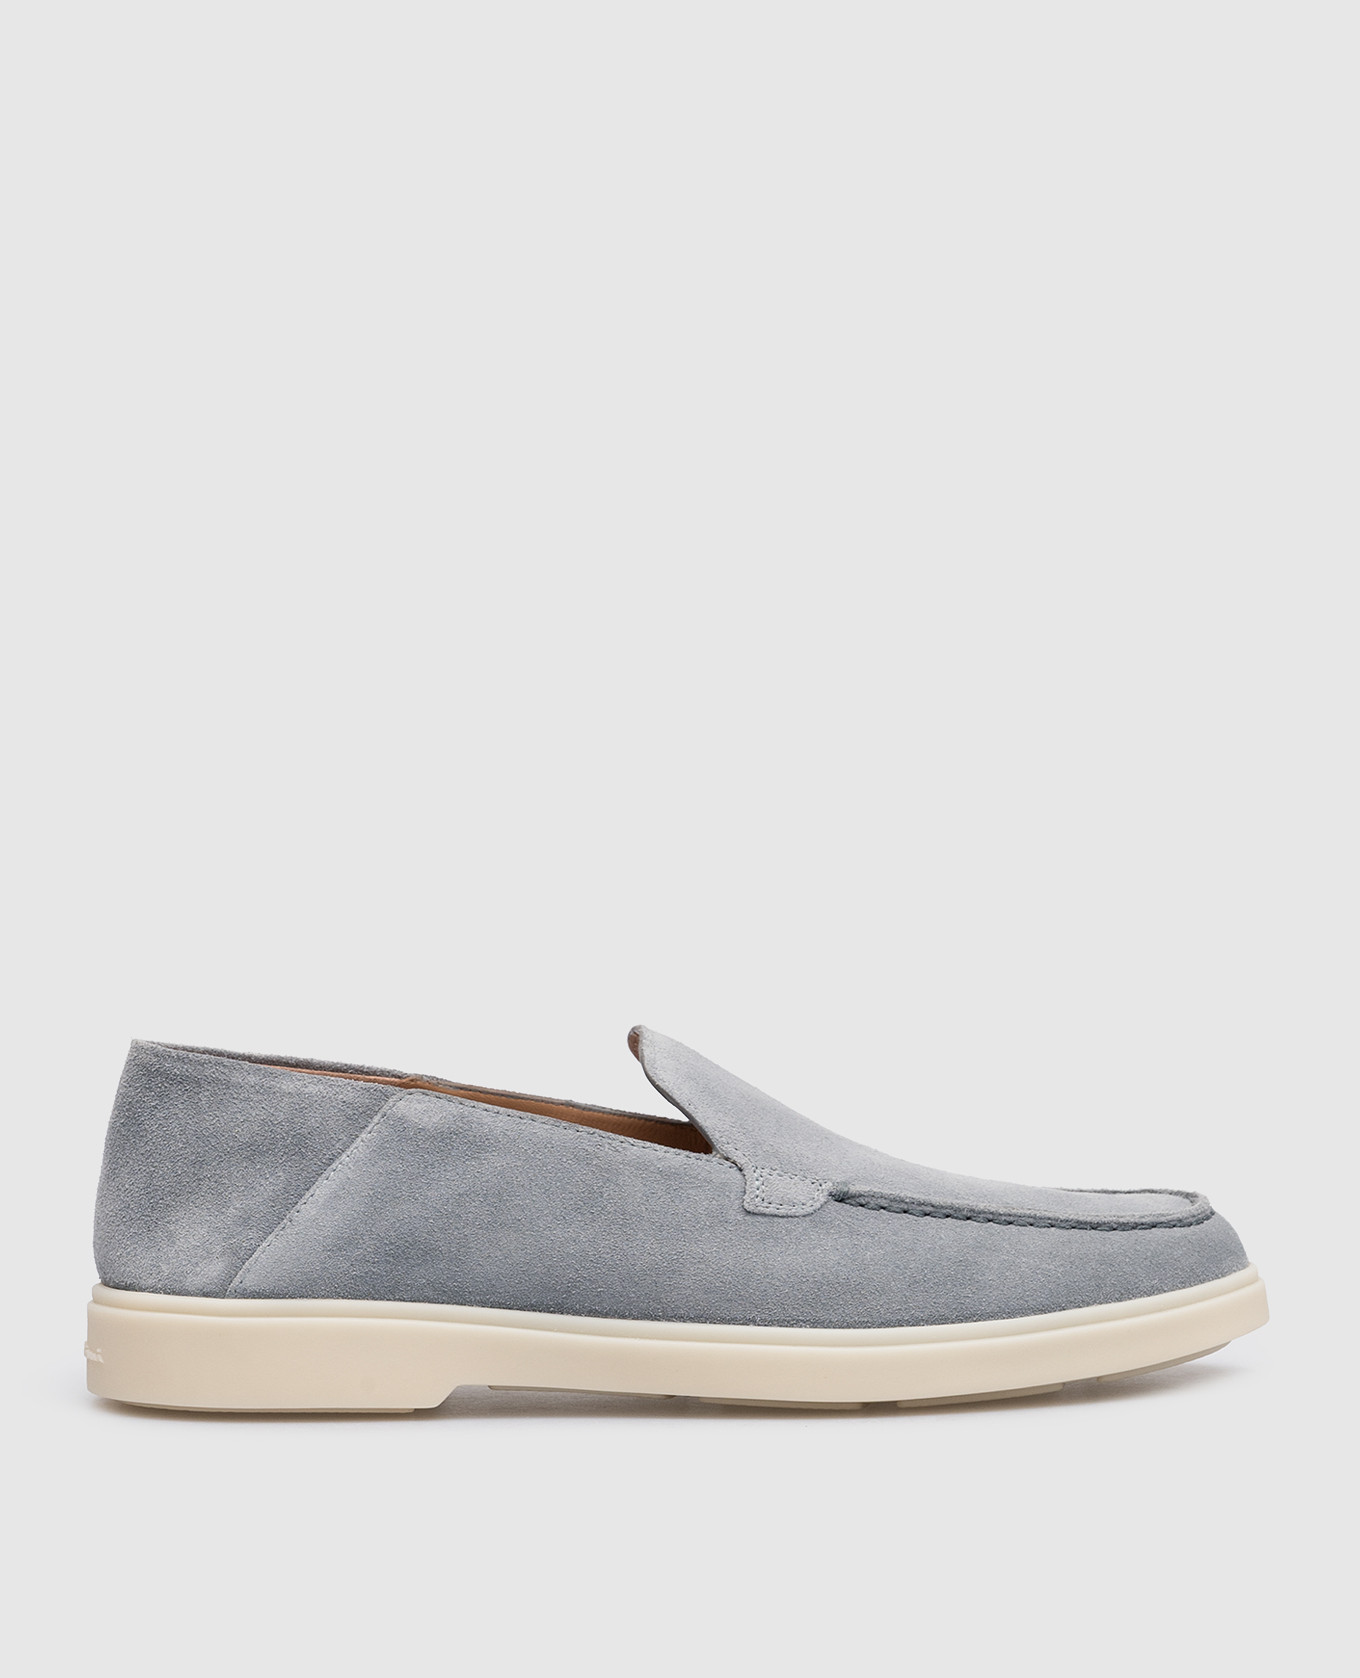 Gray suede slippers